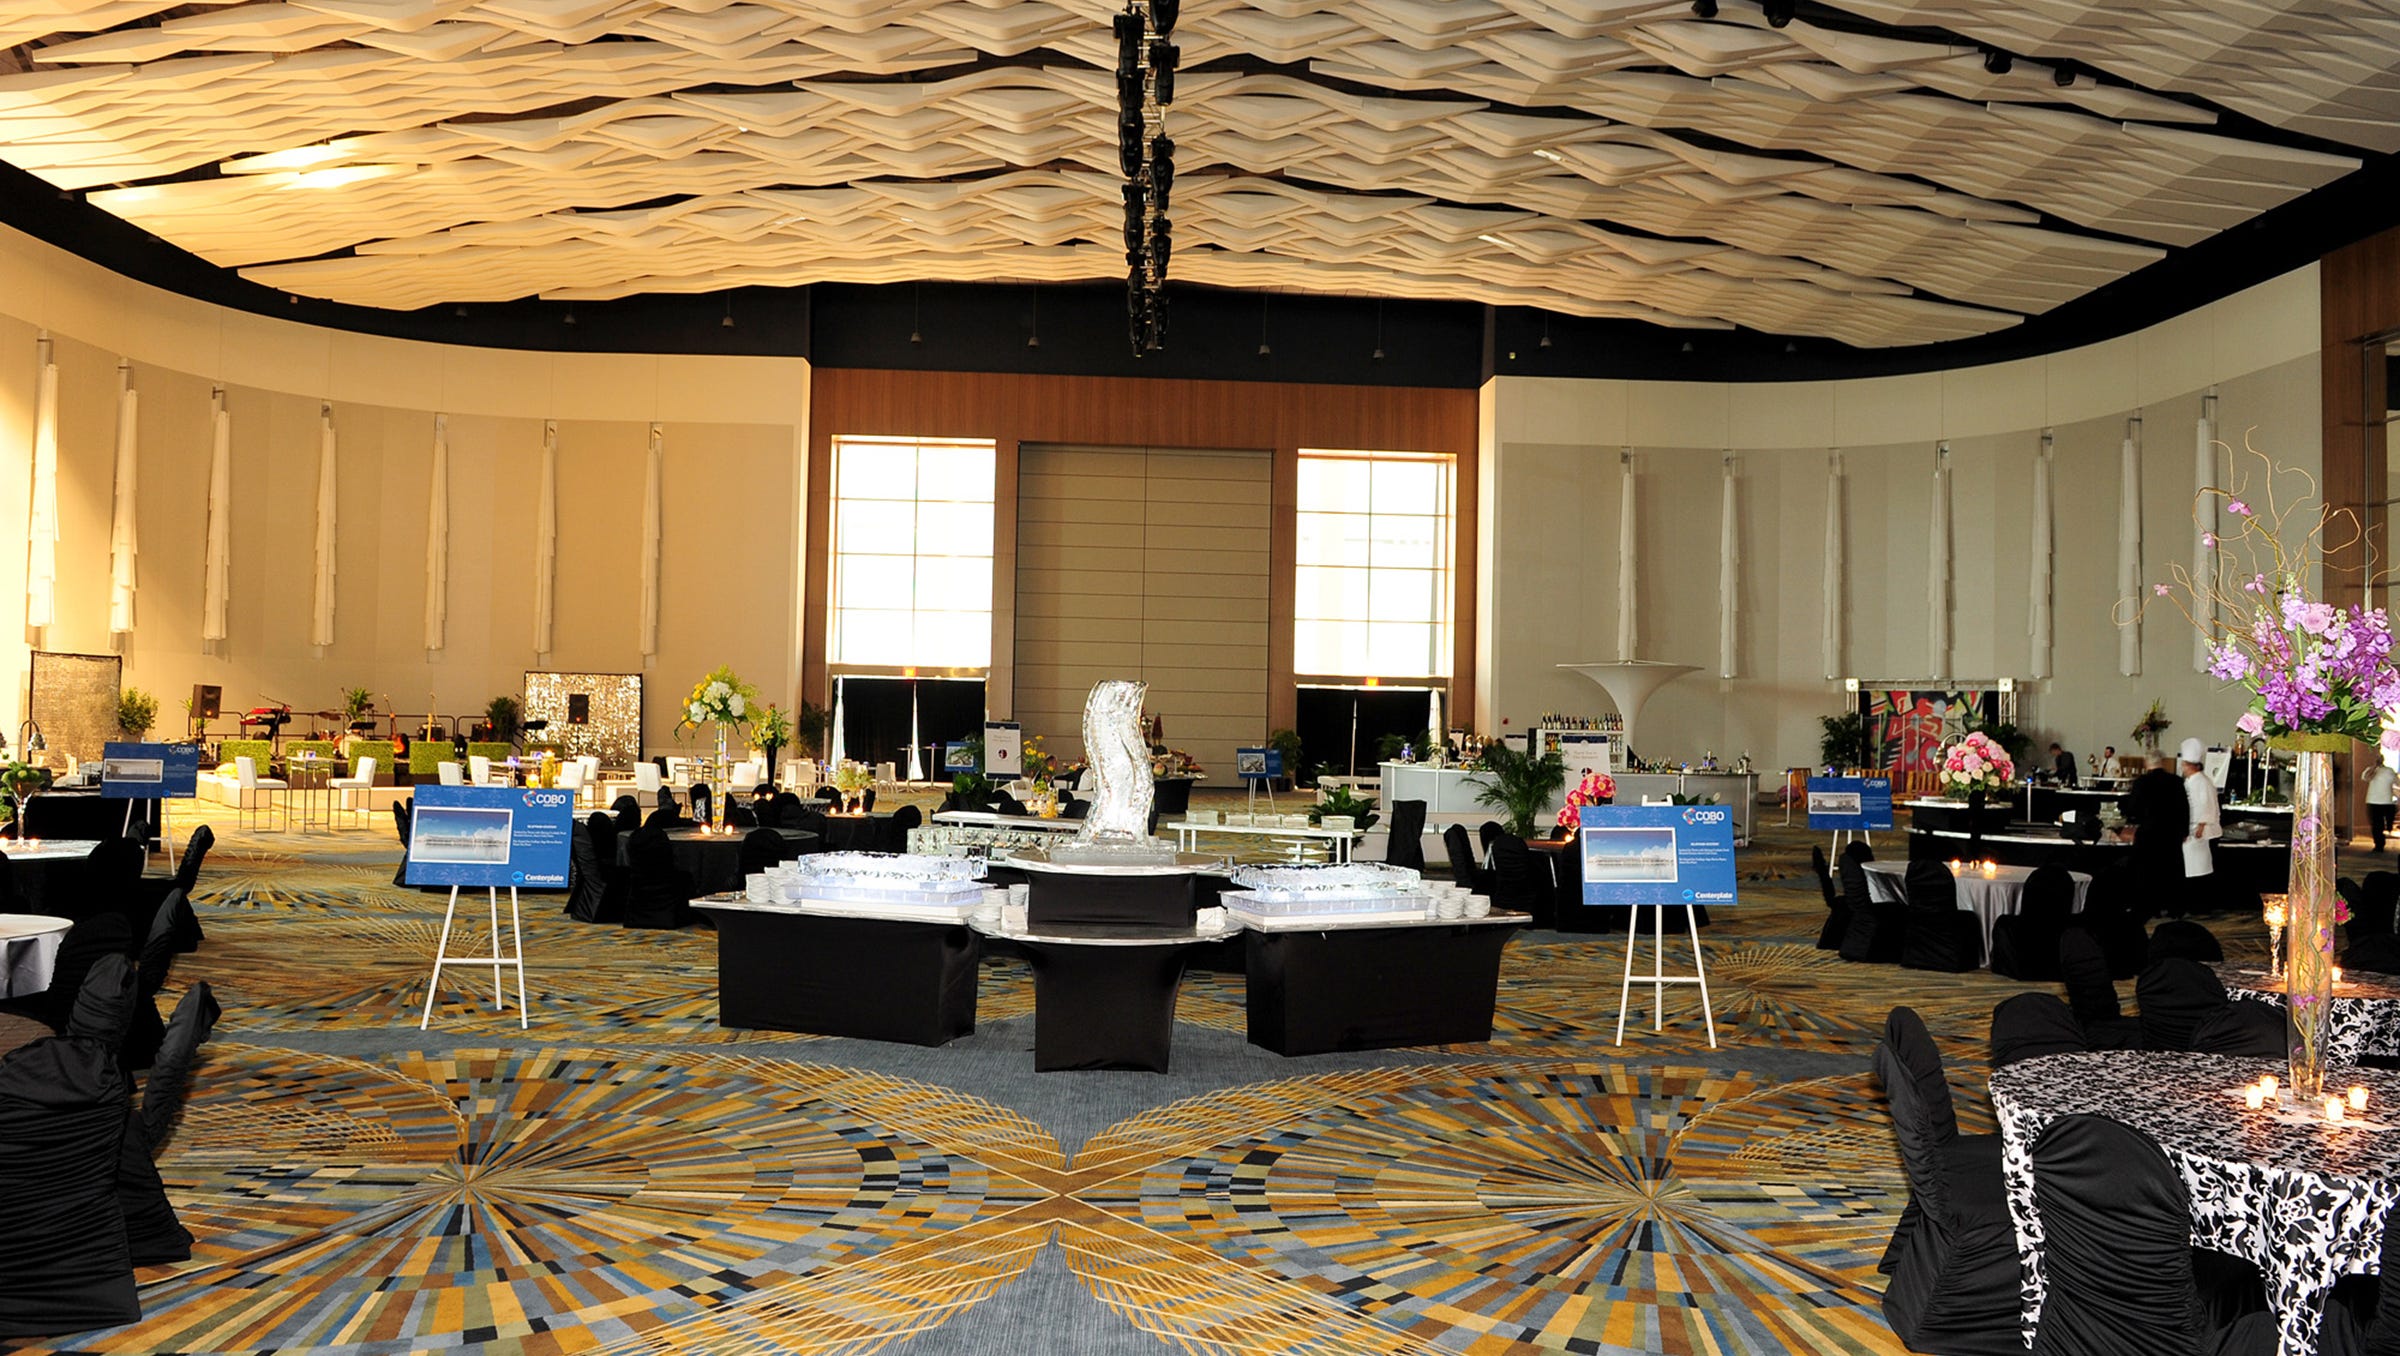 The Grand Ballroom, seen at its Sept. 07, 2013 opening, has hosted business and charity events, police graduation ceremonies, political rallies and other special events.